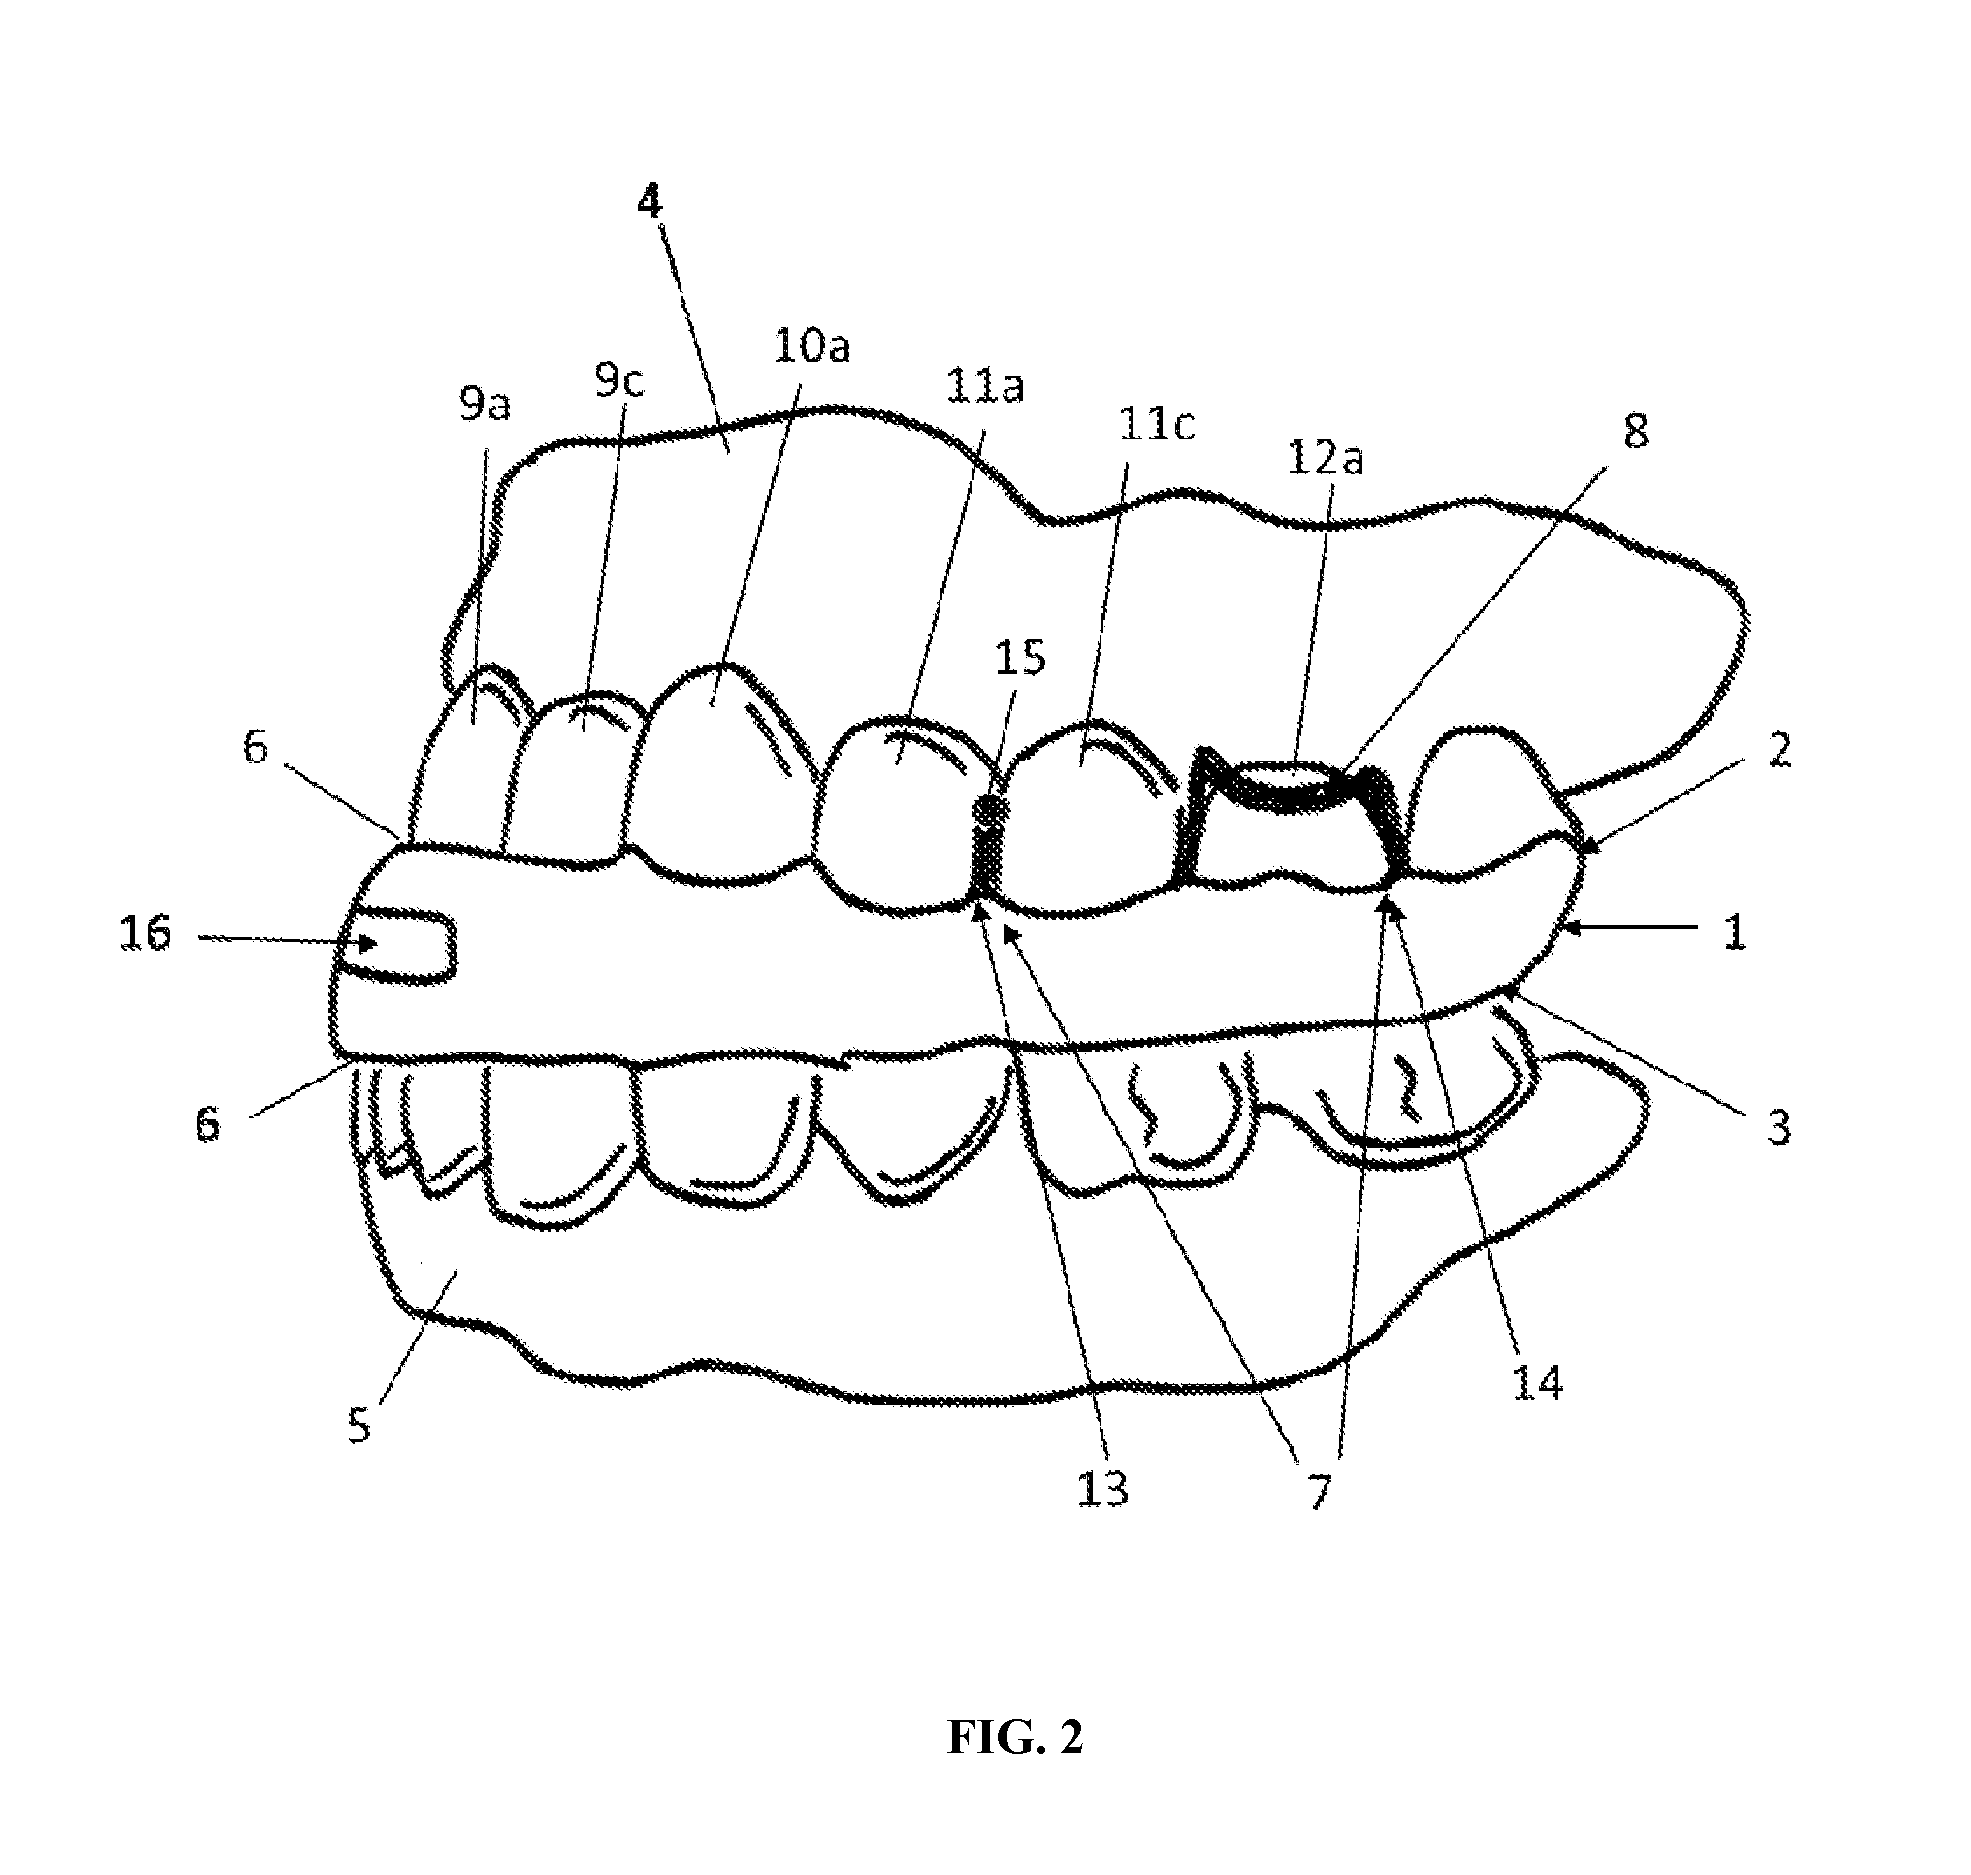 Intraoral functional device for relieving obstructive sleep apnea syndrom, snoring and/or other airway disorders